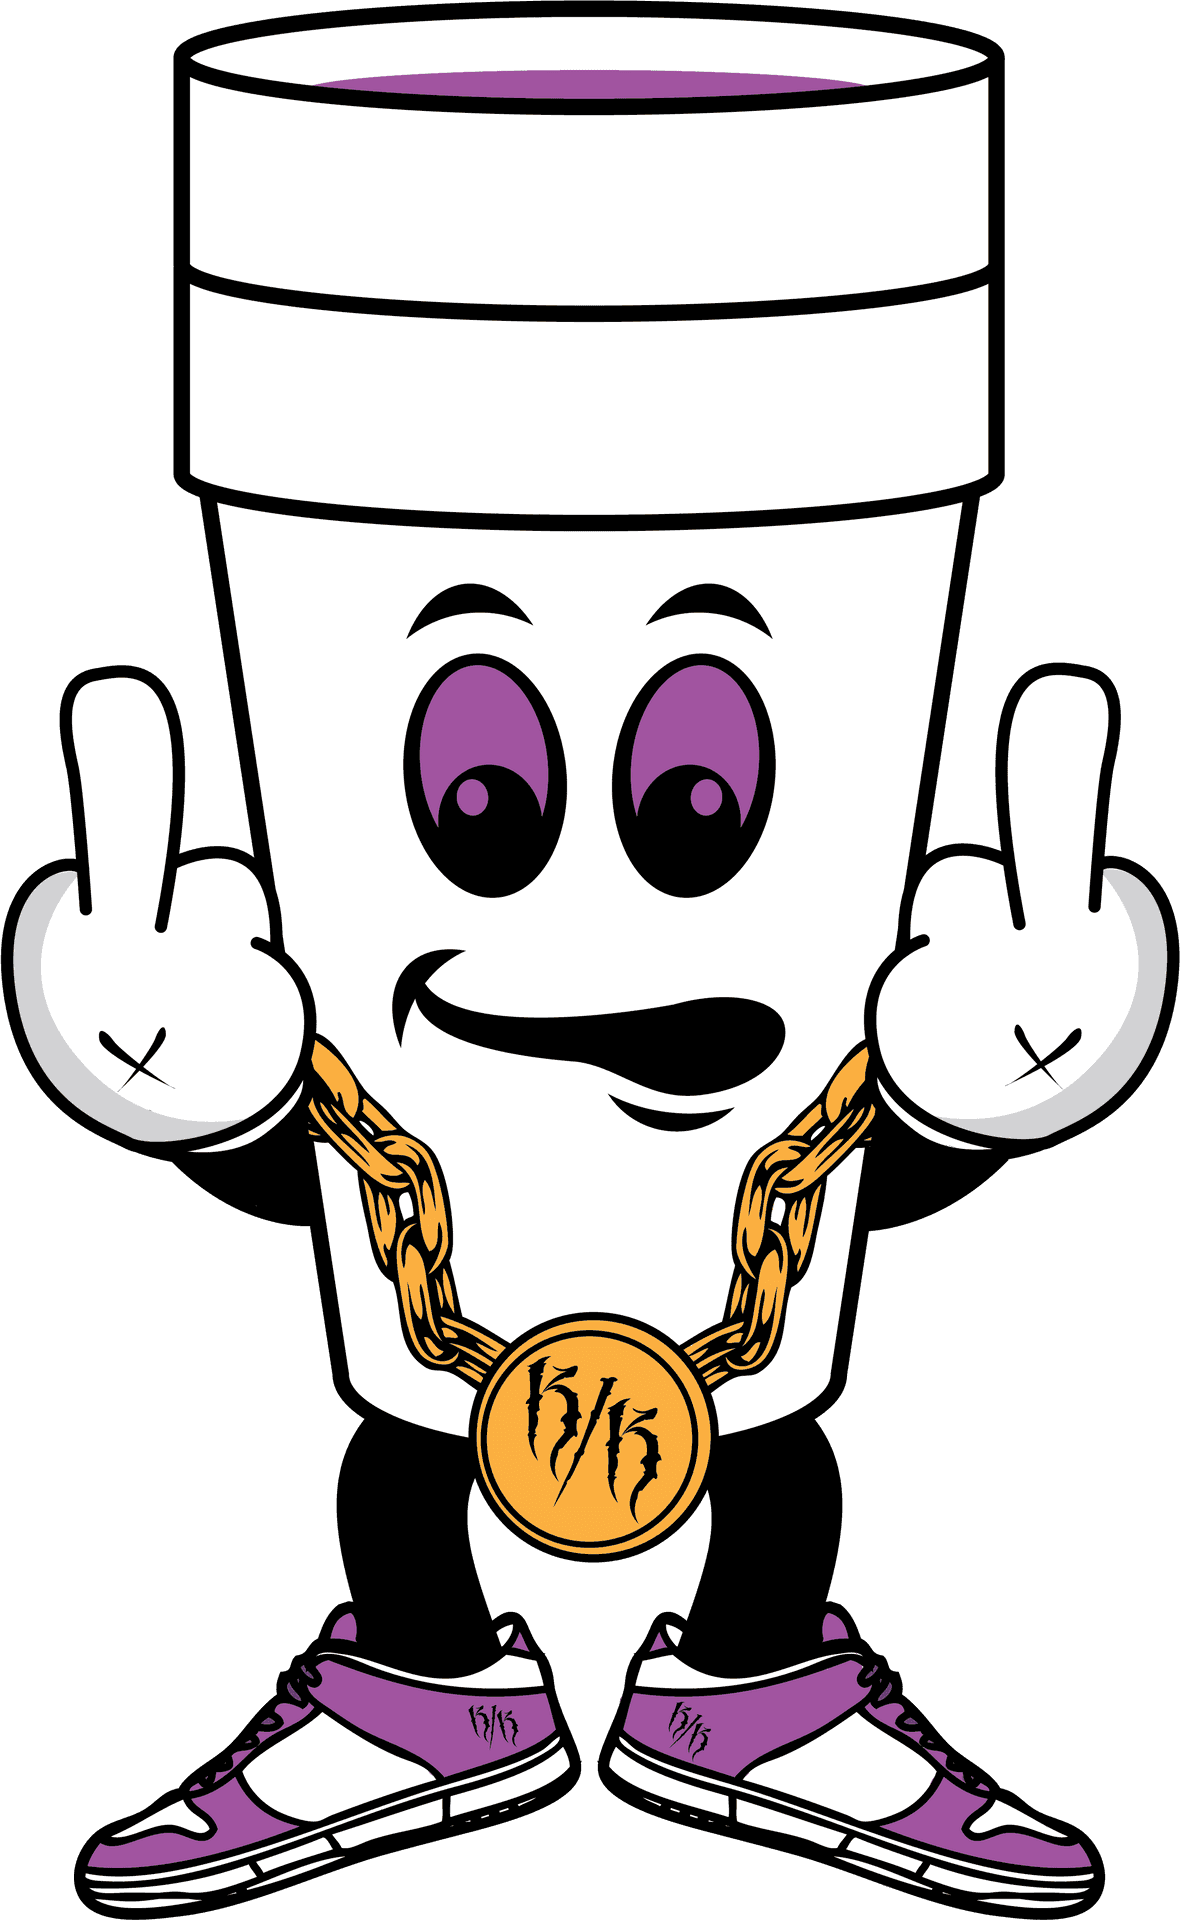 Stylish Cup Character With Medallionand Sneakers PNG image